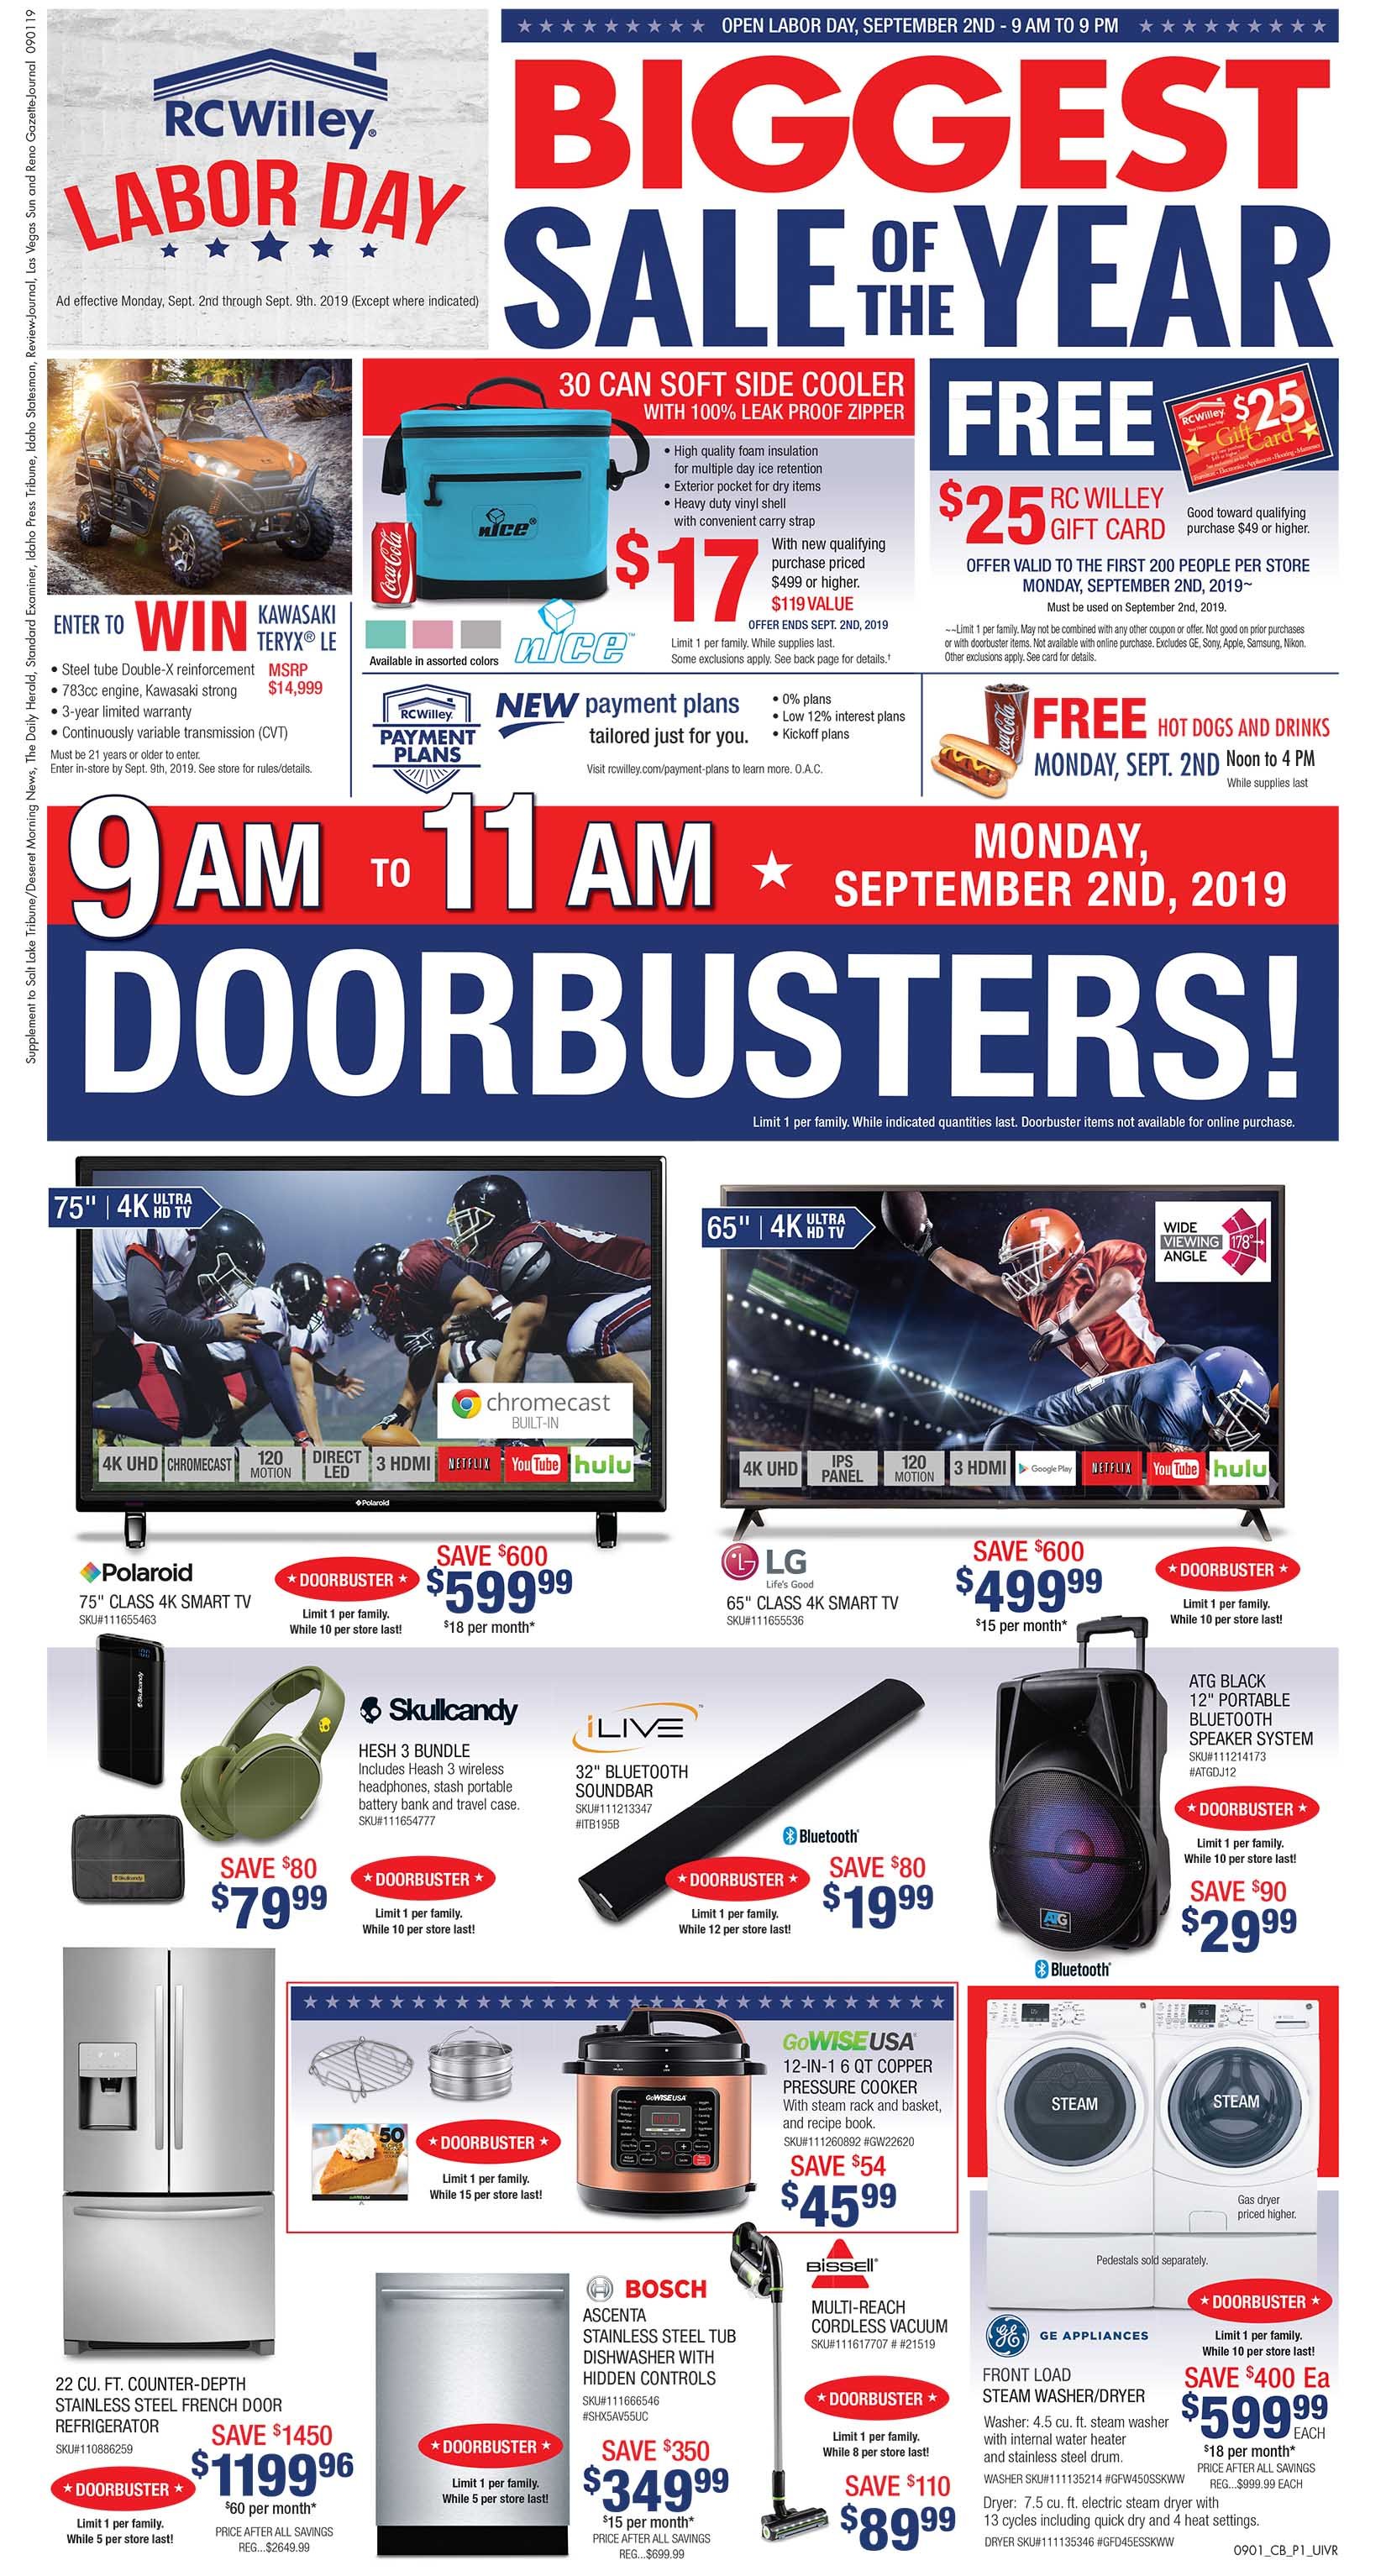 RC Willey's Labor Day Appliances and Electronics Sale! Plus DOORBUSTERS!!